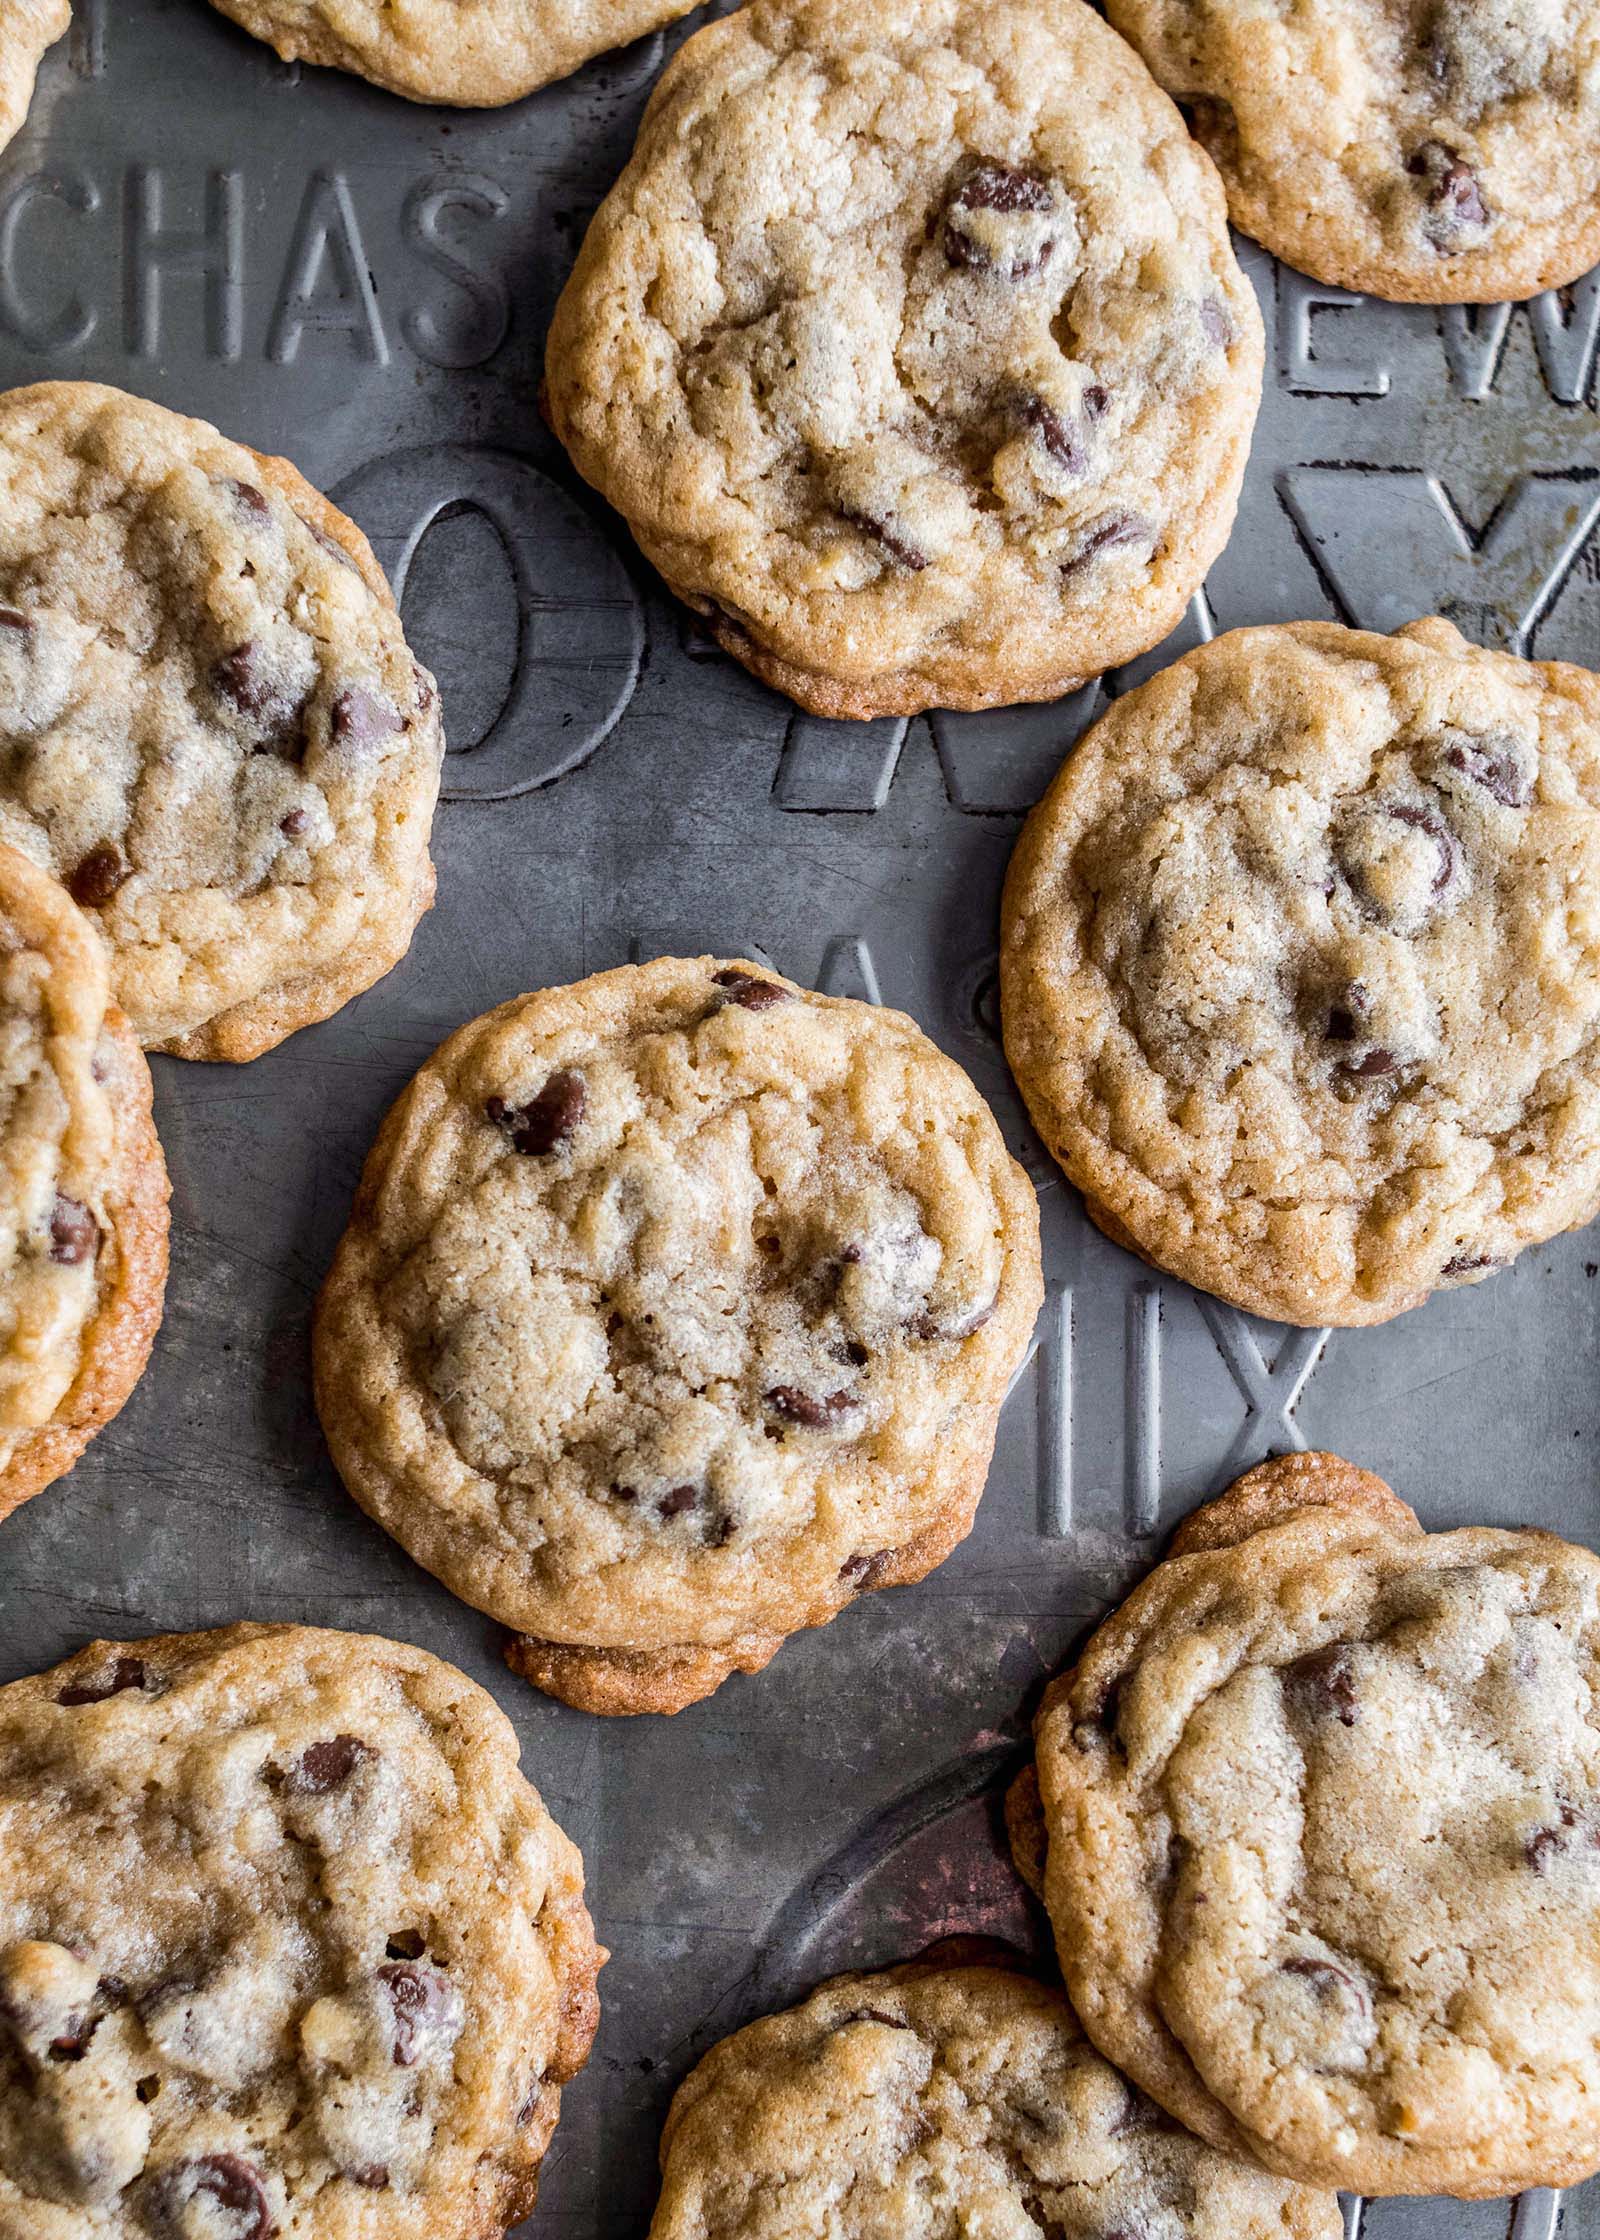 Decadent Delights: Elevating the Classic Chocolate Chip Cookie Recipe to New Heights